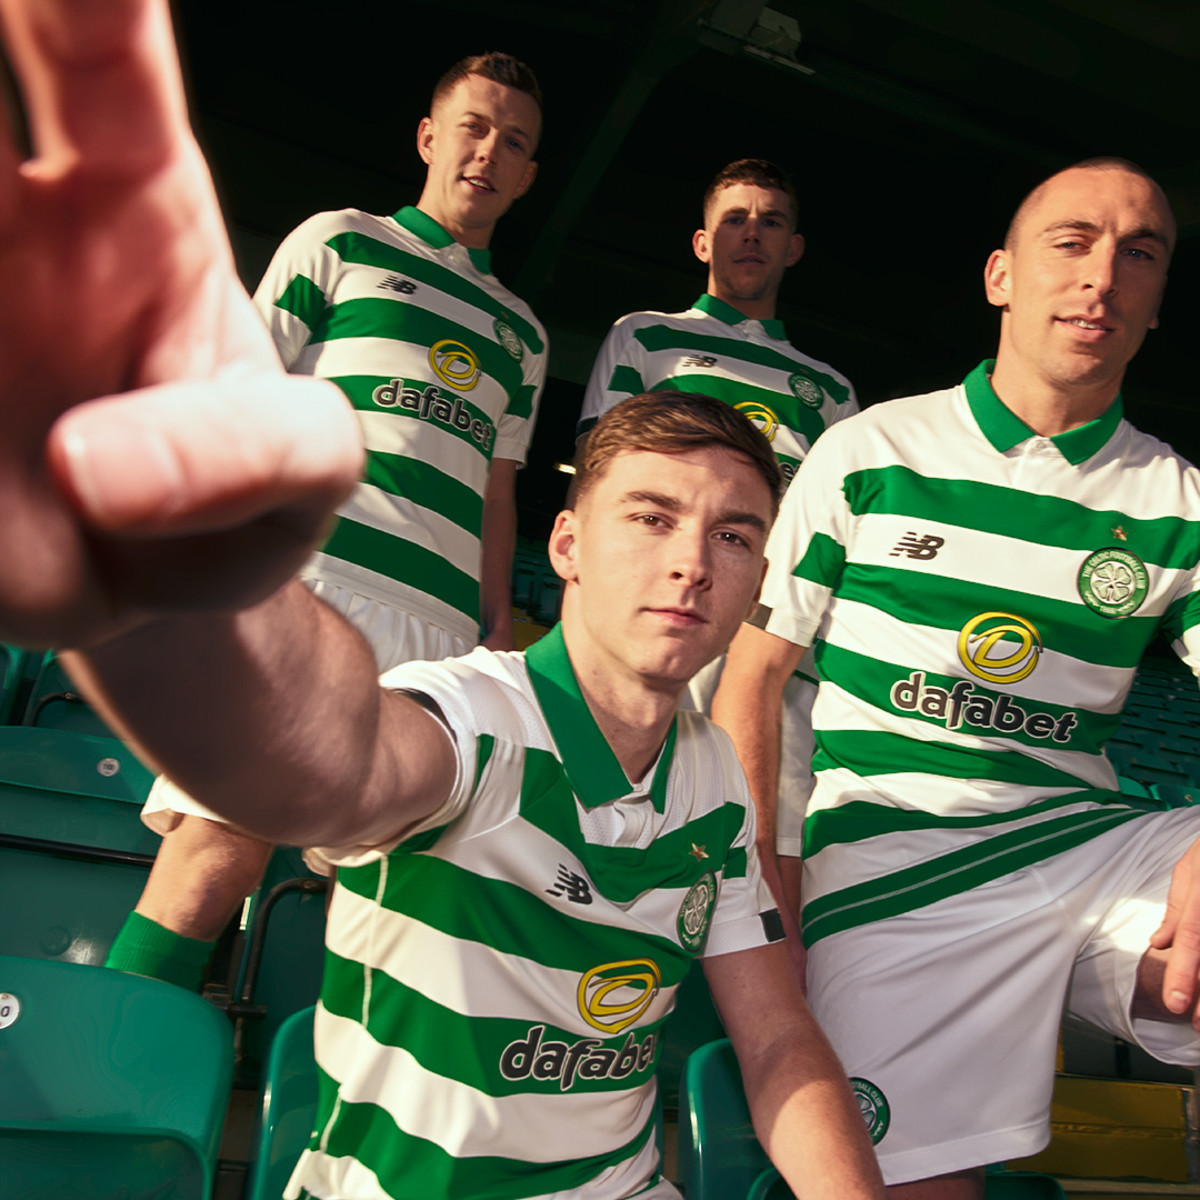 Celtic FC - The new Celtic 2013/2014 home kit is nearly here. Follow in the  footsteps of the icons who have worn the famous Celtic no.7 jersey and  #BeCeltic7 for the Season